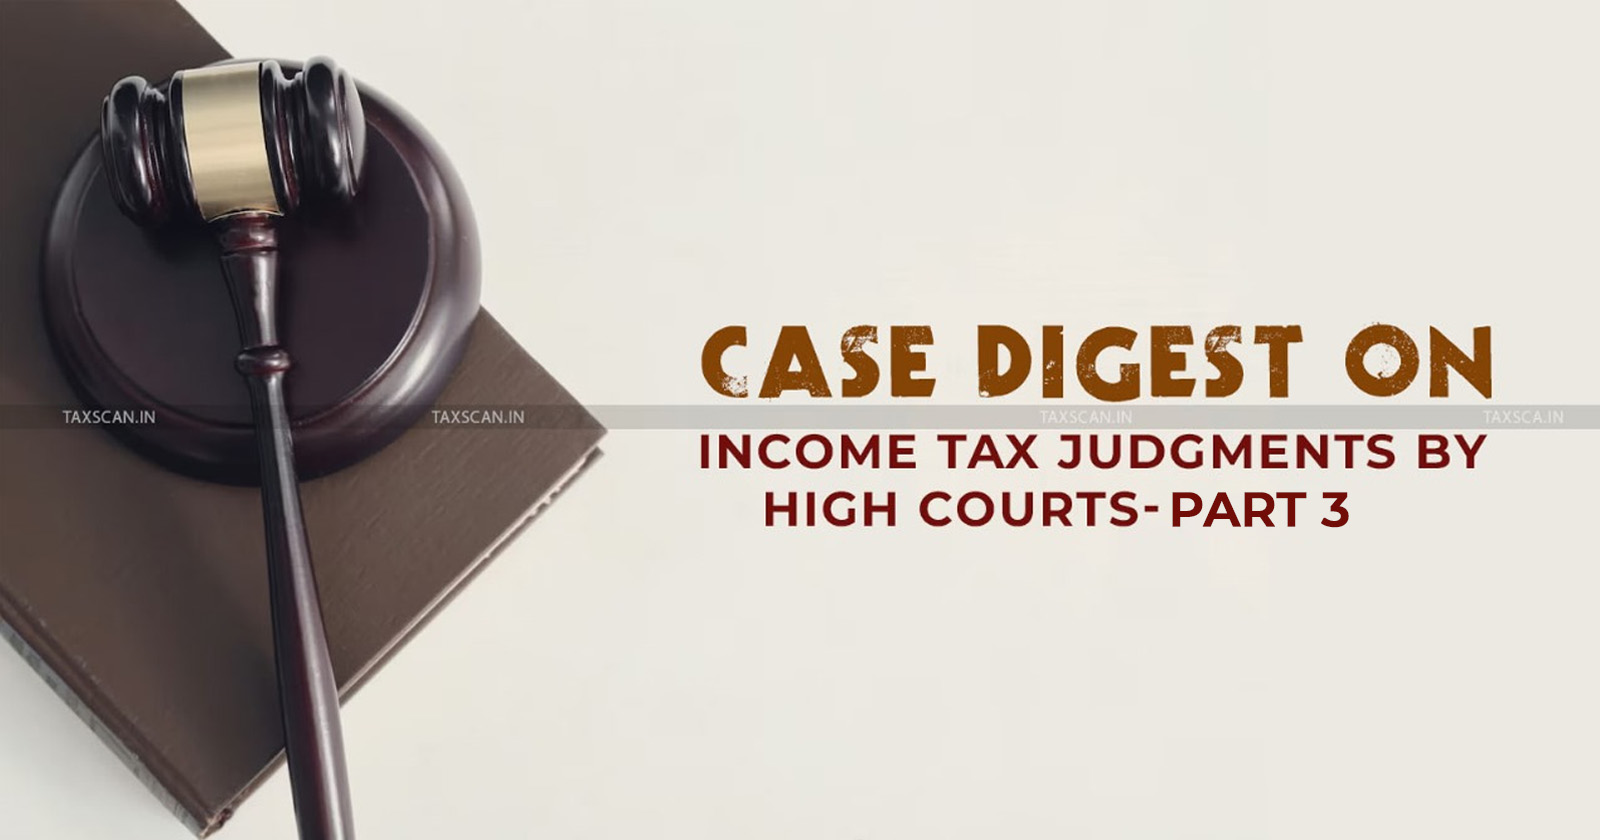 CASE DIGEST ON HIGH COURT INCOME TAX JUDGMENTS - CASE DIGEST - HIGH COURT - INCOME TAX JUDGMENTS - JUDGMENTS - INCOME TAX - ITAT - TAXSCAN